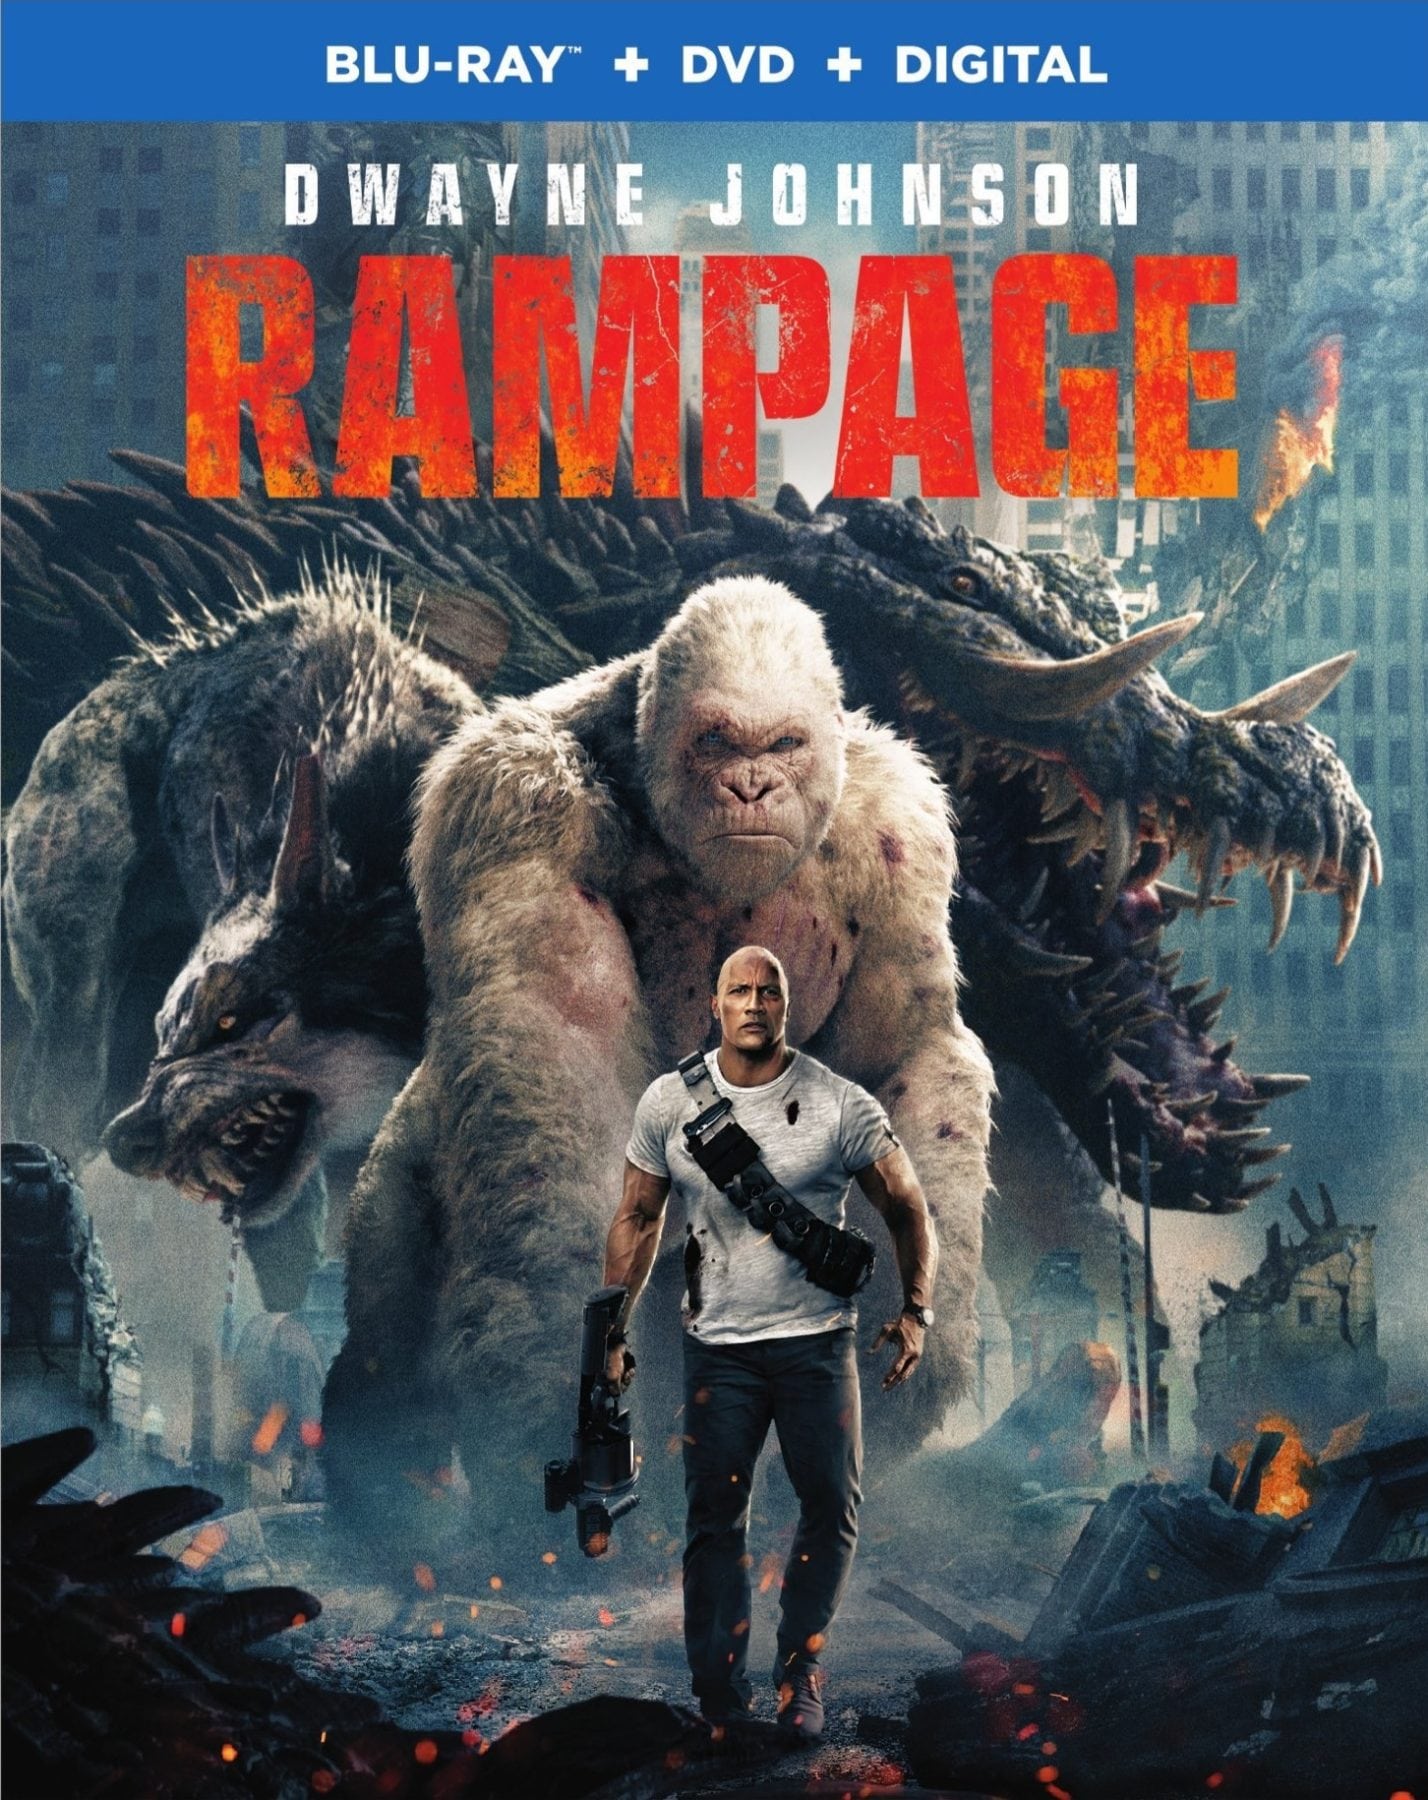 Blu-ray Review - Rampage (2018)